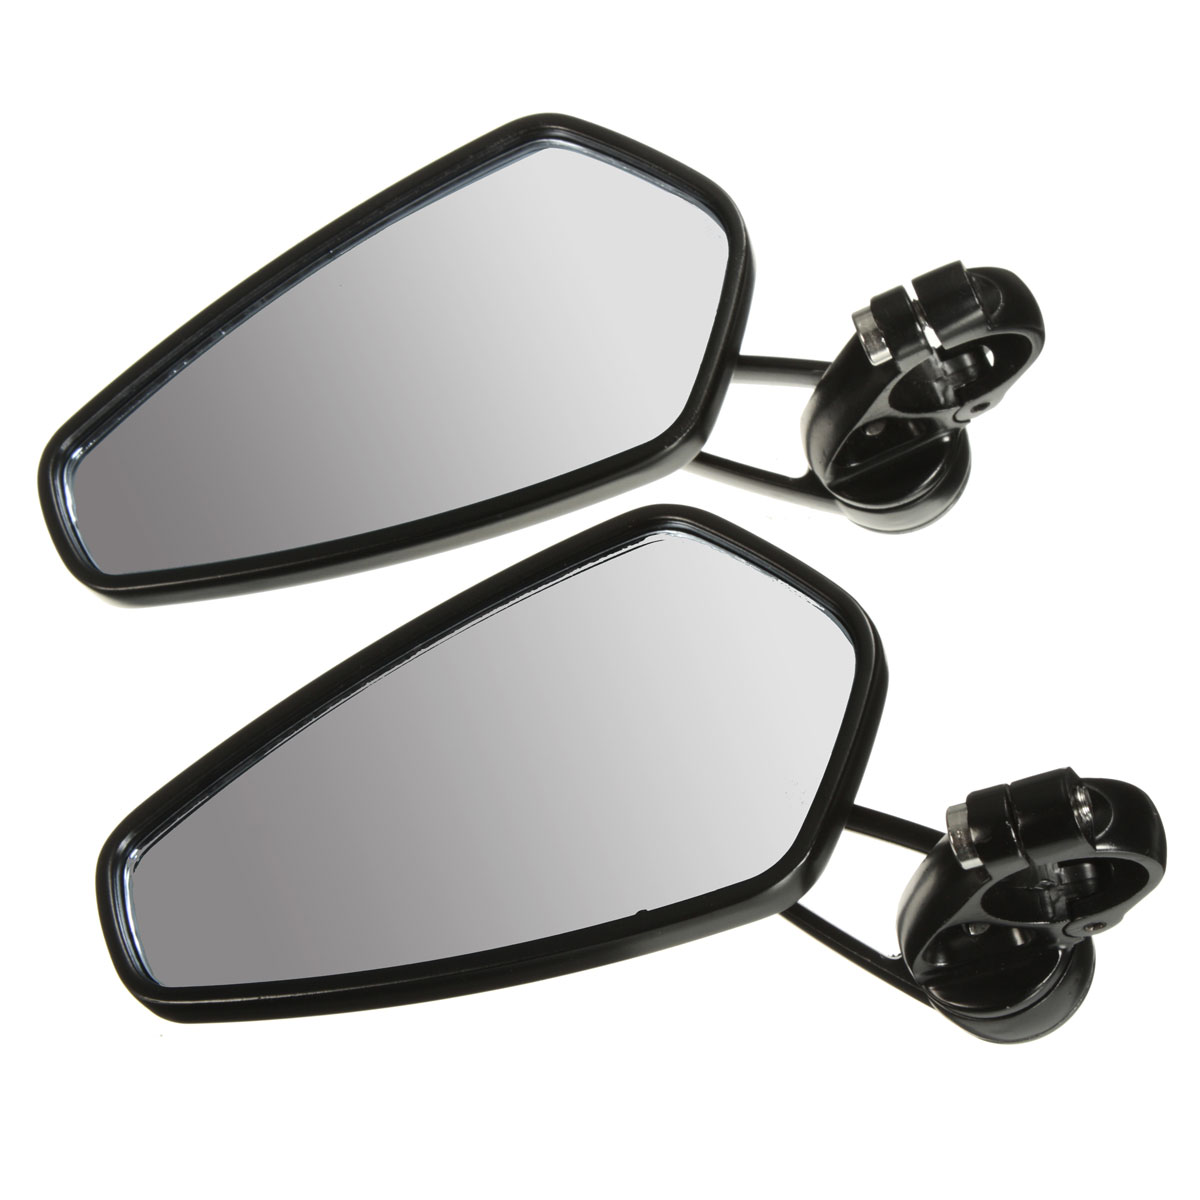 2Pcs 7/8 Inch 22Mm Motorcycle Handle Bar End Rearview Side Mirrors Aluminum for Triumph Speed Triple Universal - Auto GoShop